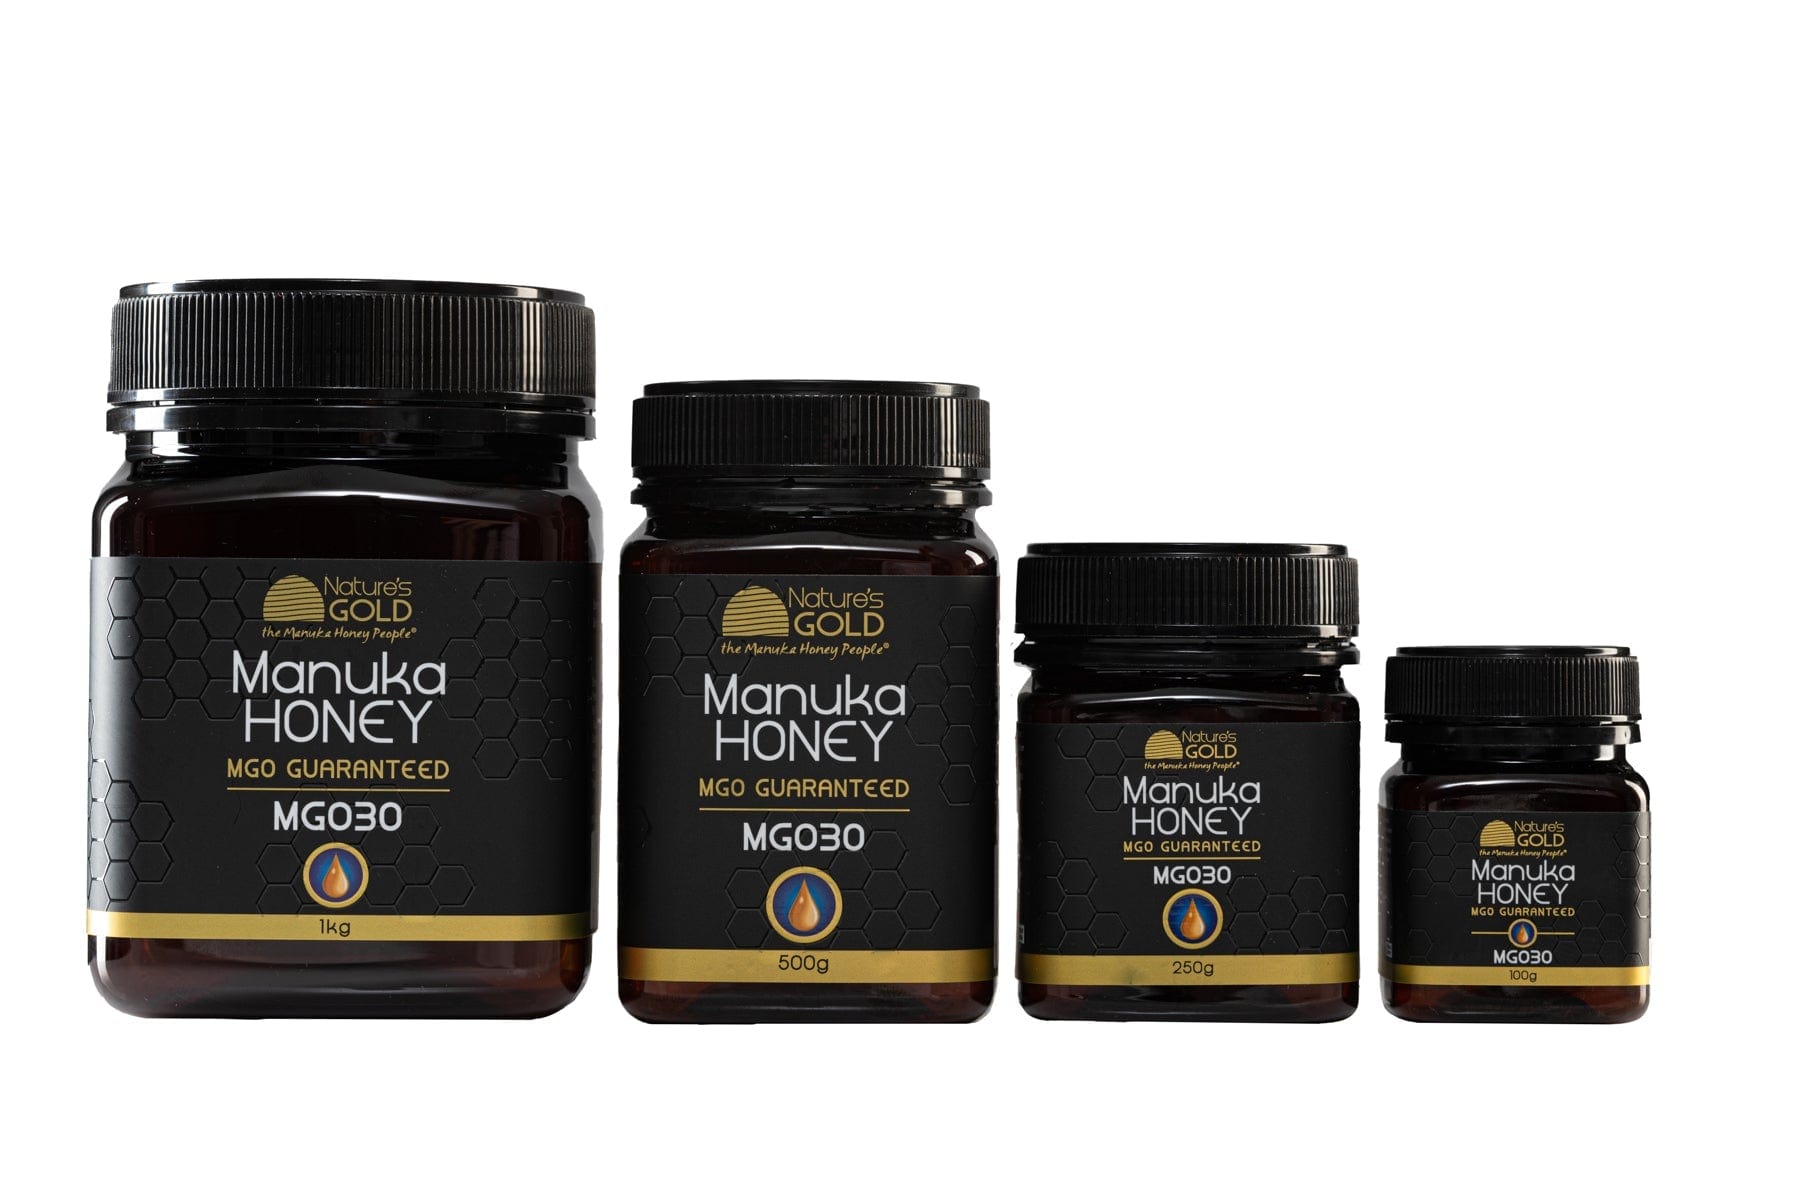 MGO 30 -100% RAW AUSTRALIAN MANUKA HONEY - Ideal to use as a natural sweetener or table honey. SALE 15% OFF